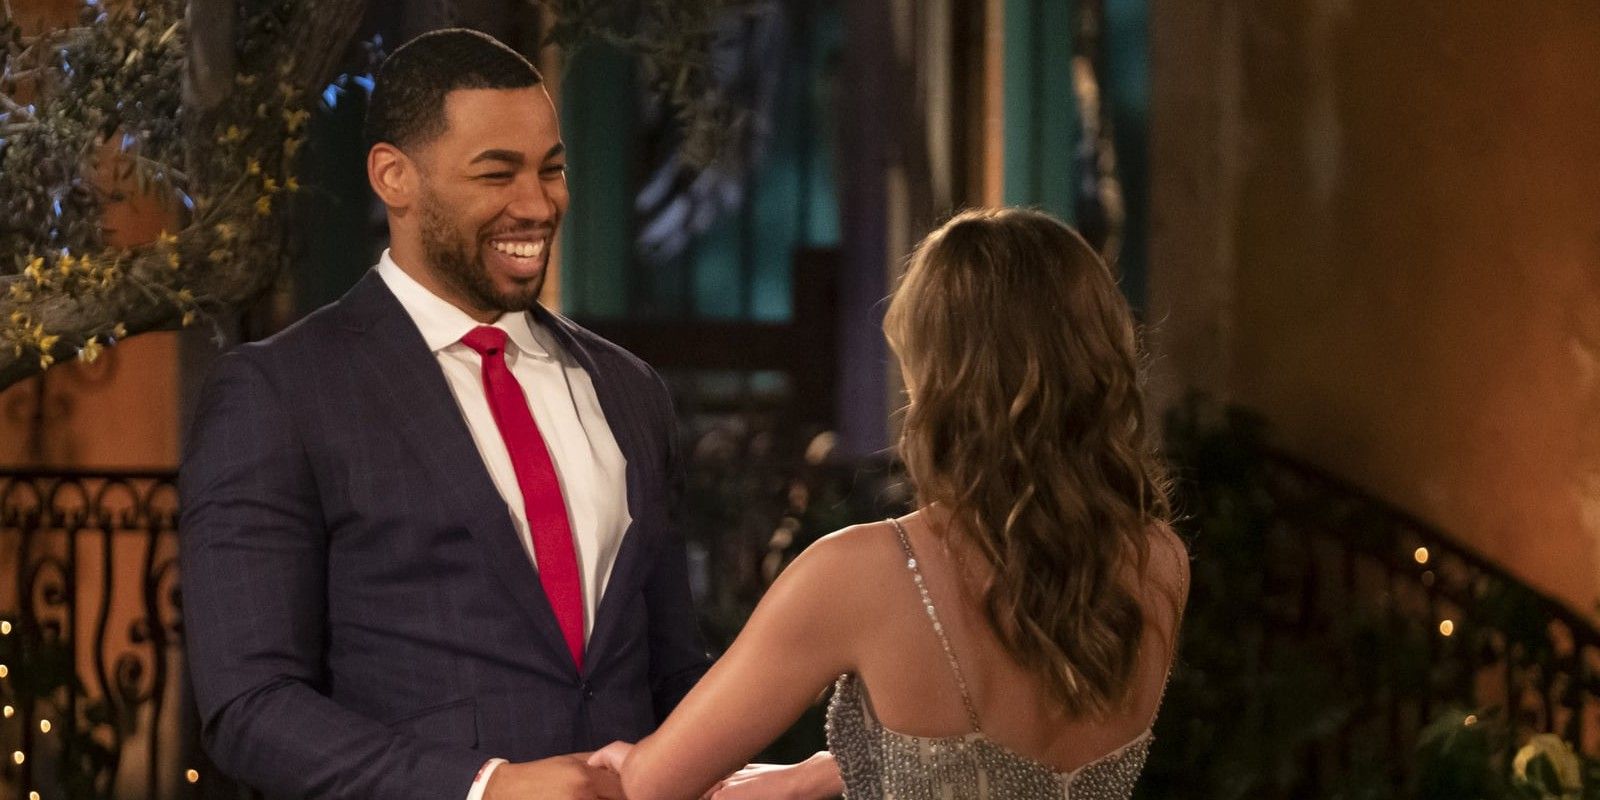 The Bachelorette's Mike Johnson in serious consideration for The Bachelor